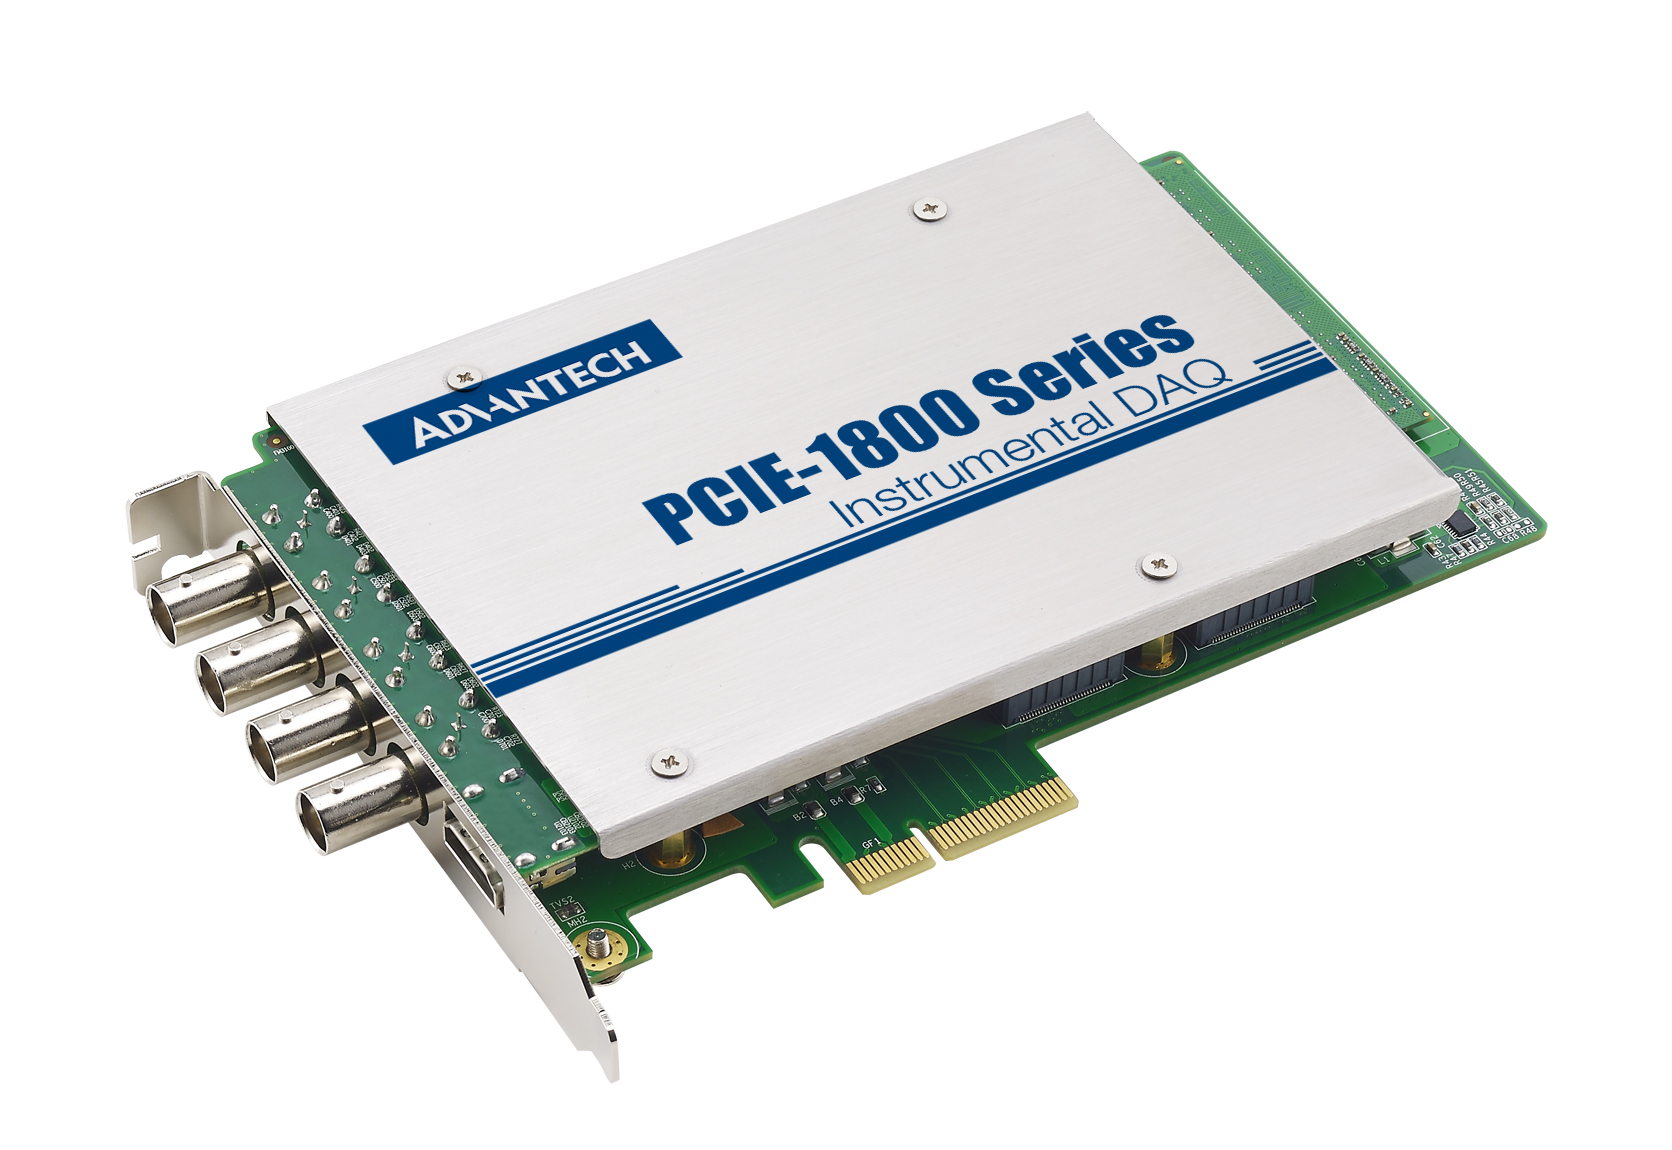 4-ch, 80MS/s Digitizer PCIE Card